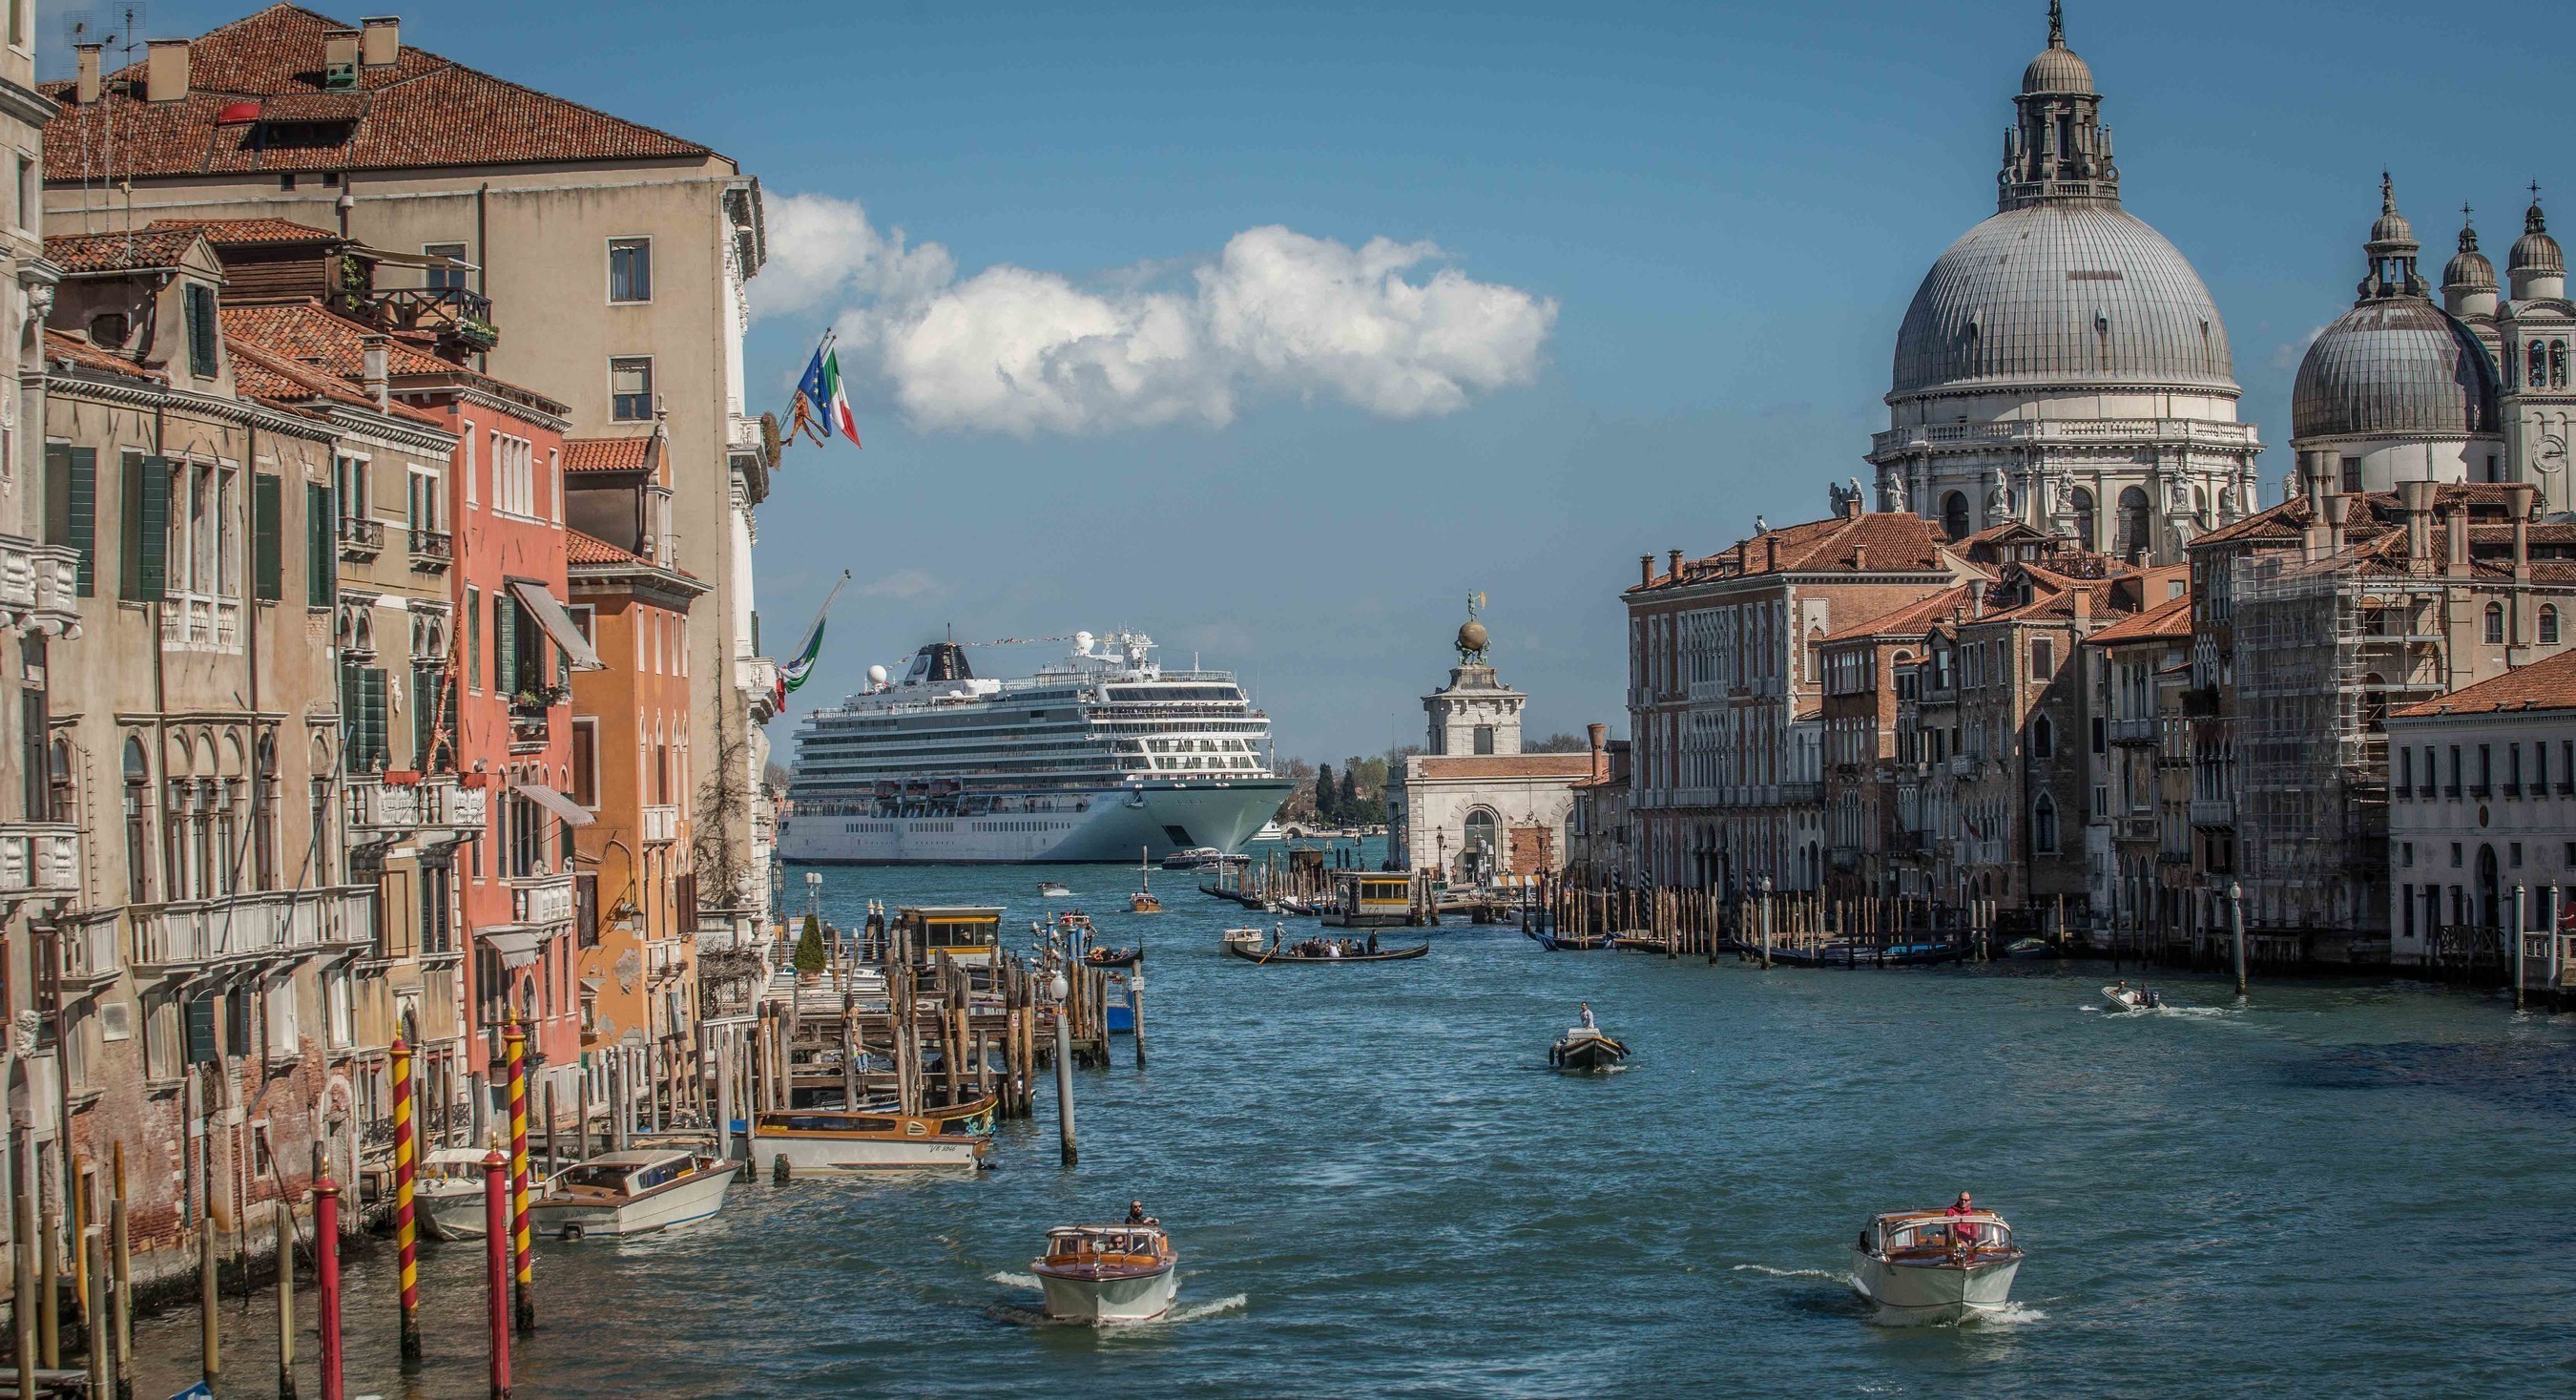 The first new ship from Viking Ocean Cruises, Viking Star, seen on her maiden voyage in Venice, Italy. From Venice, Viking Star will make her way to be officially christened in Bergen, Norway during a citywide celebration on May 17 - Norwegian Constitution Day. Developed from the ground up to return the focus of cruising to the destination, Viking Ocean Cruises also has two additional sister ships on order - Viking Sky and Viking Sea - which will sail itineraries in Scandinavia and the Baltic; and the Western and Eastern Mediterranean.